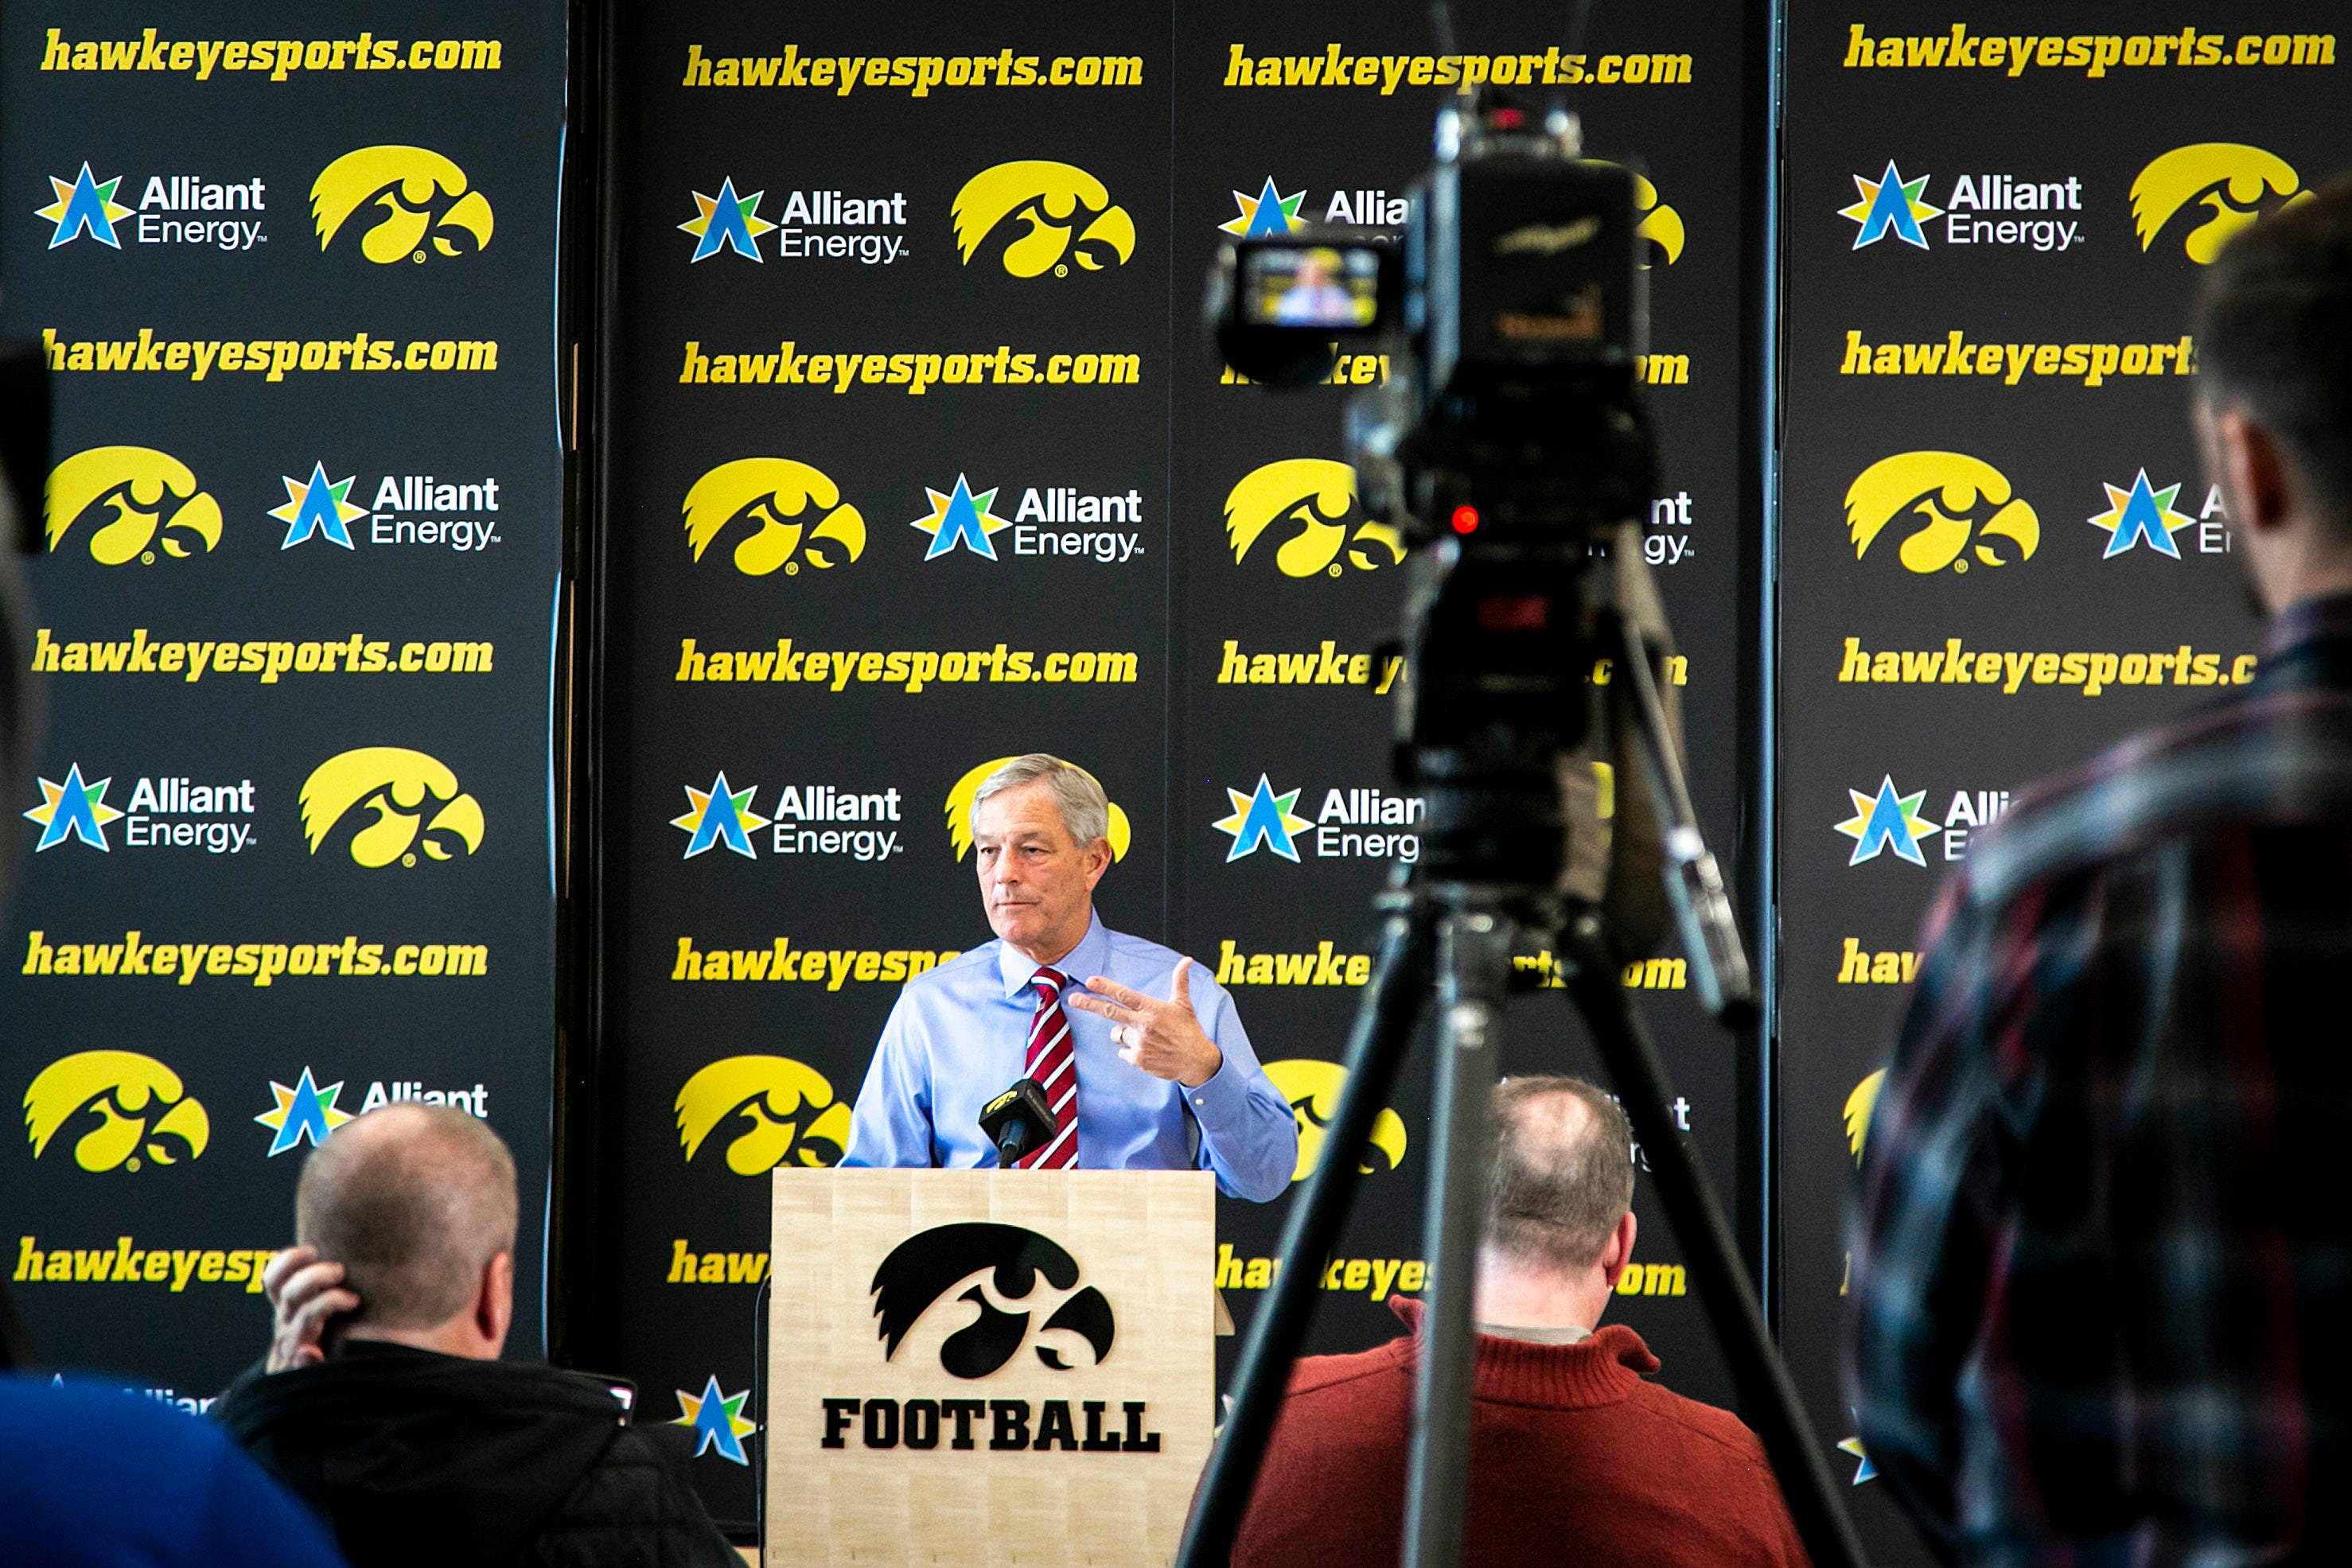 Iowa head coach Kirk Ferentz speaks to reporters during a news conference ahead of the Big Ten Championship football game, Tuesday, Nov. 30, 2021, at the Hansen Football Performance Center in Iowa City, Iowa.